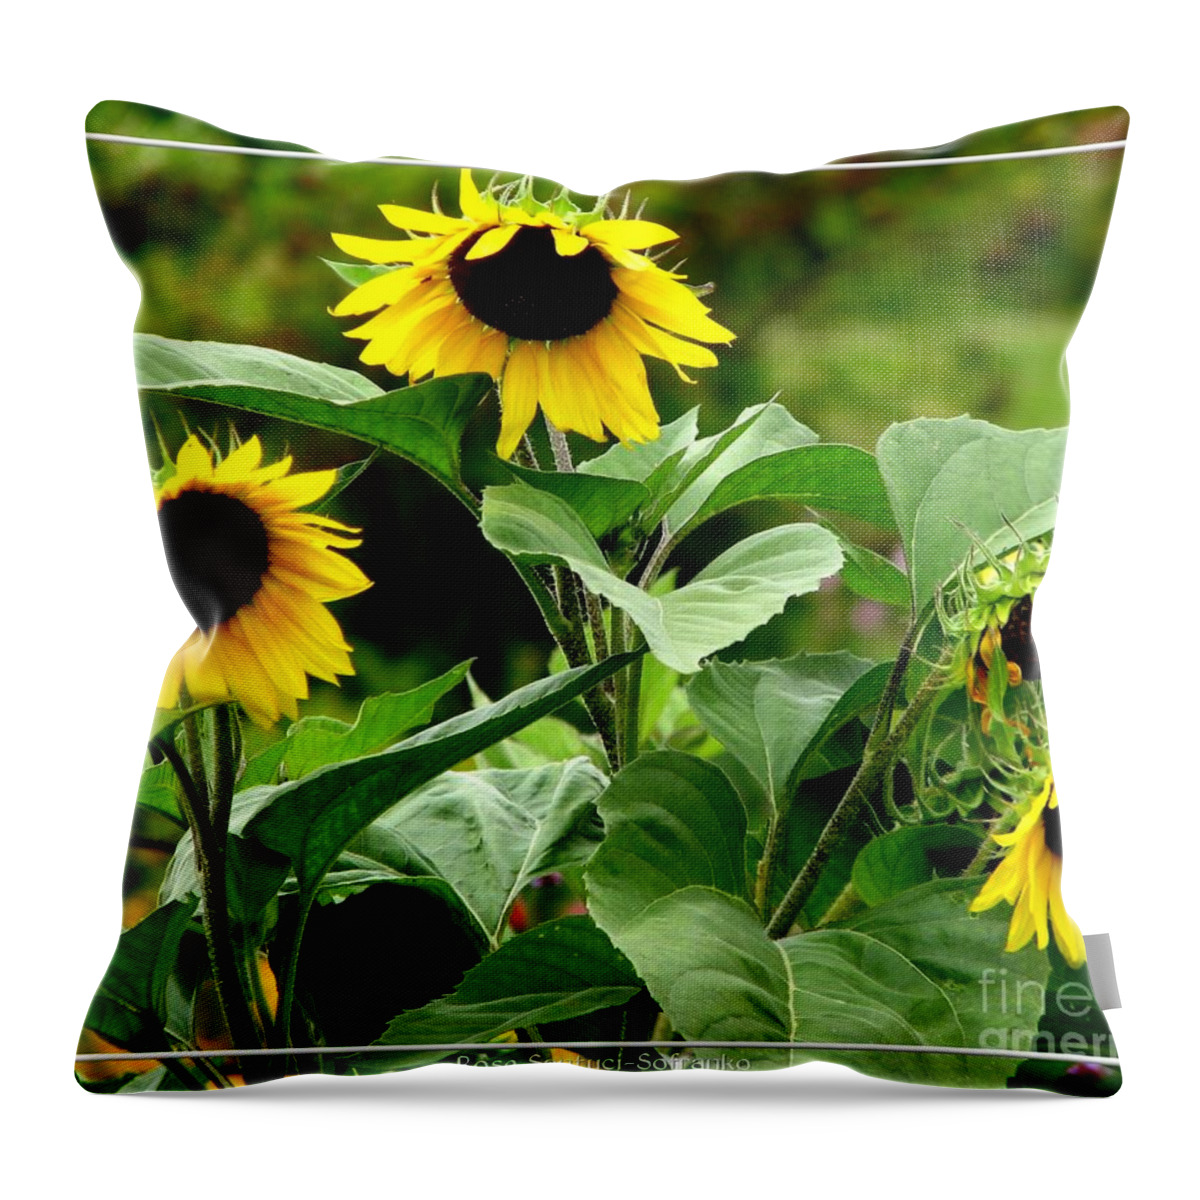 Sunflowers Throw Pillow featuring the photograph Sunflowers by Rose Santuci-Sofranko